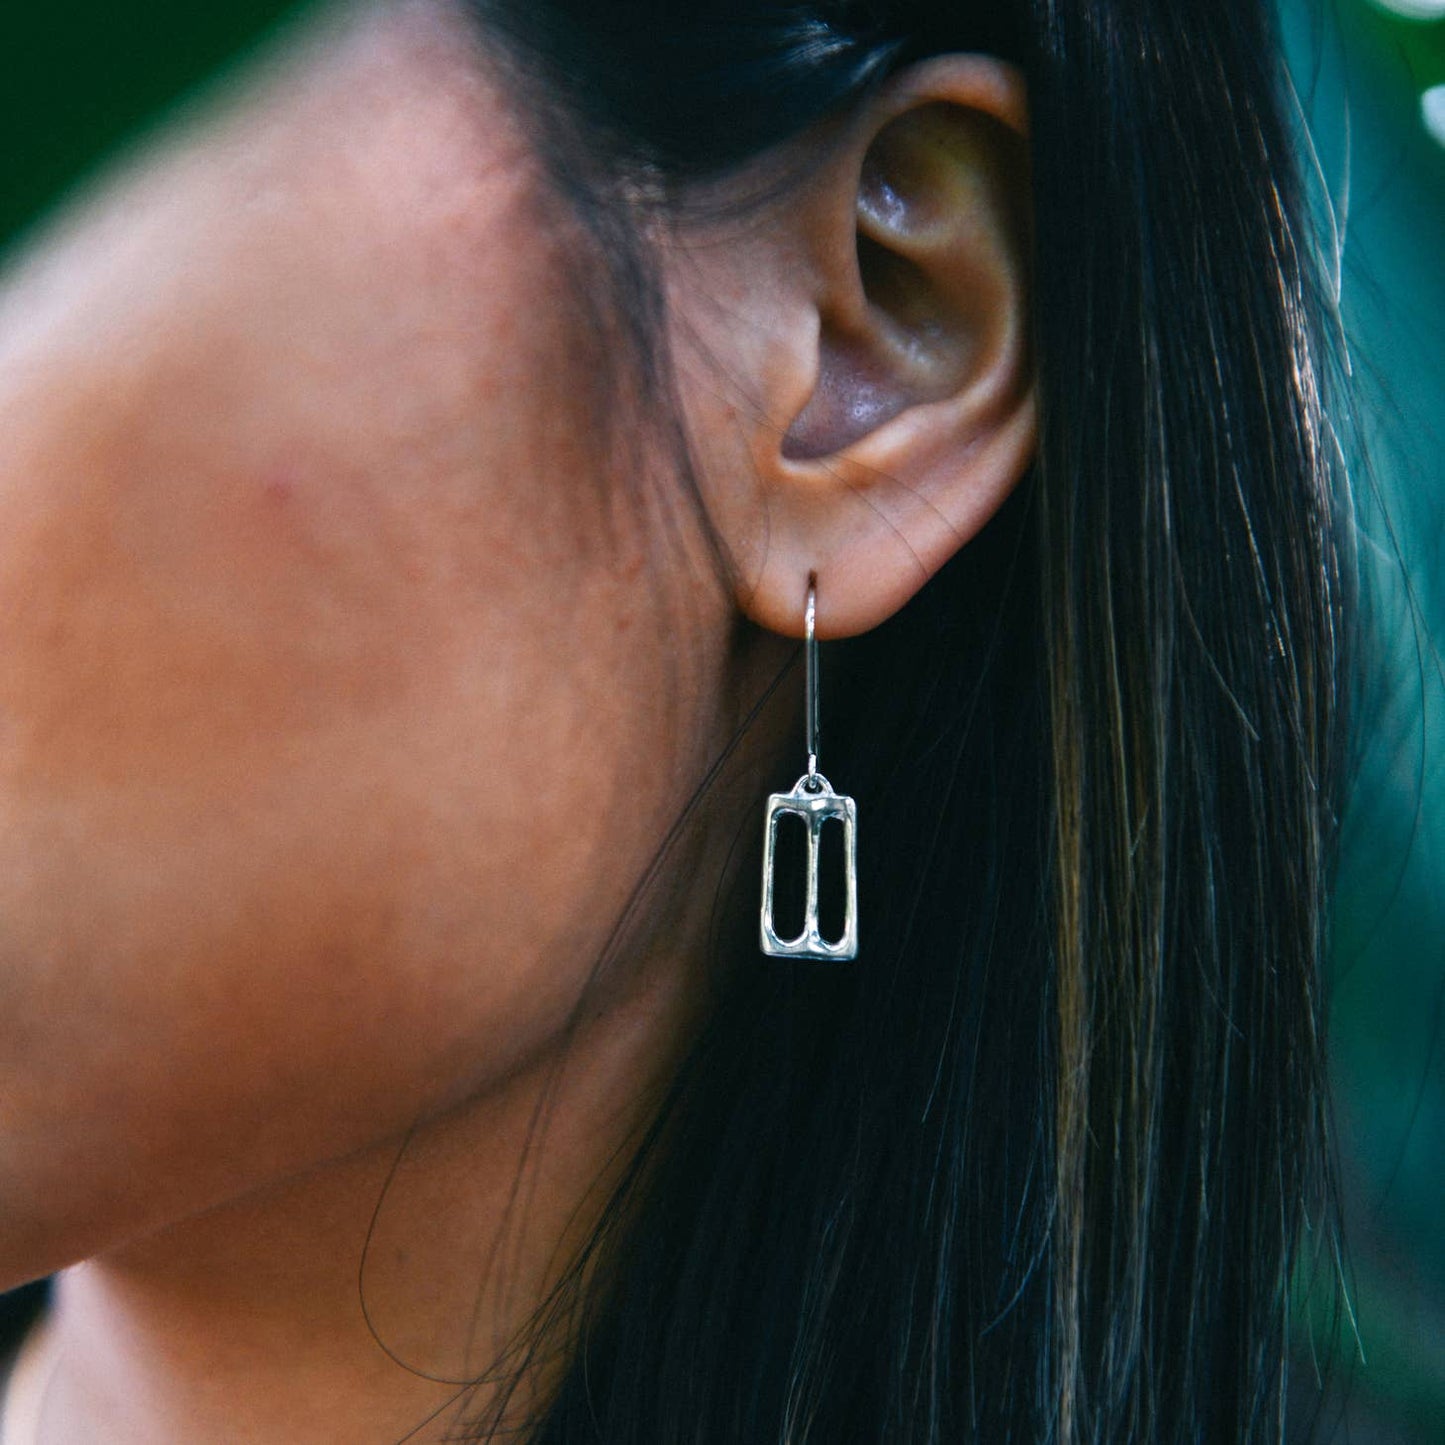 These earrings have been lovingly hand carved in wax, then cast in sterling silver metal using the lost wax casting process.